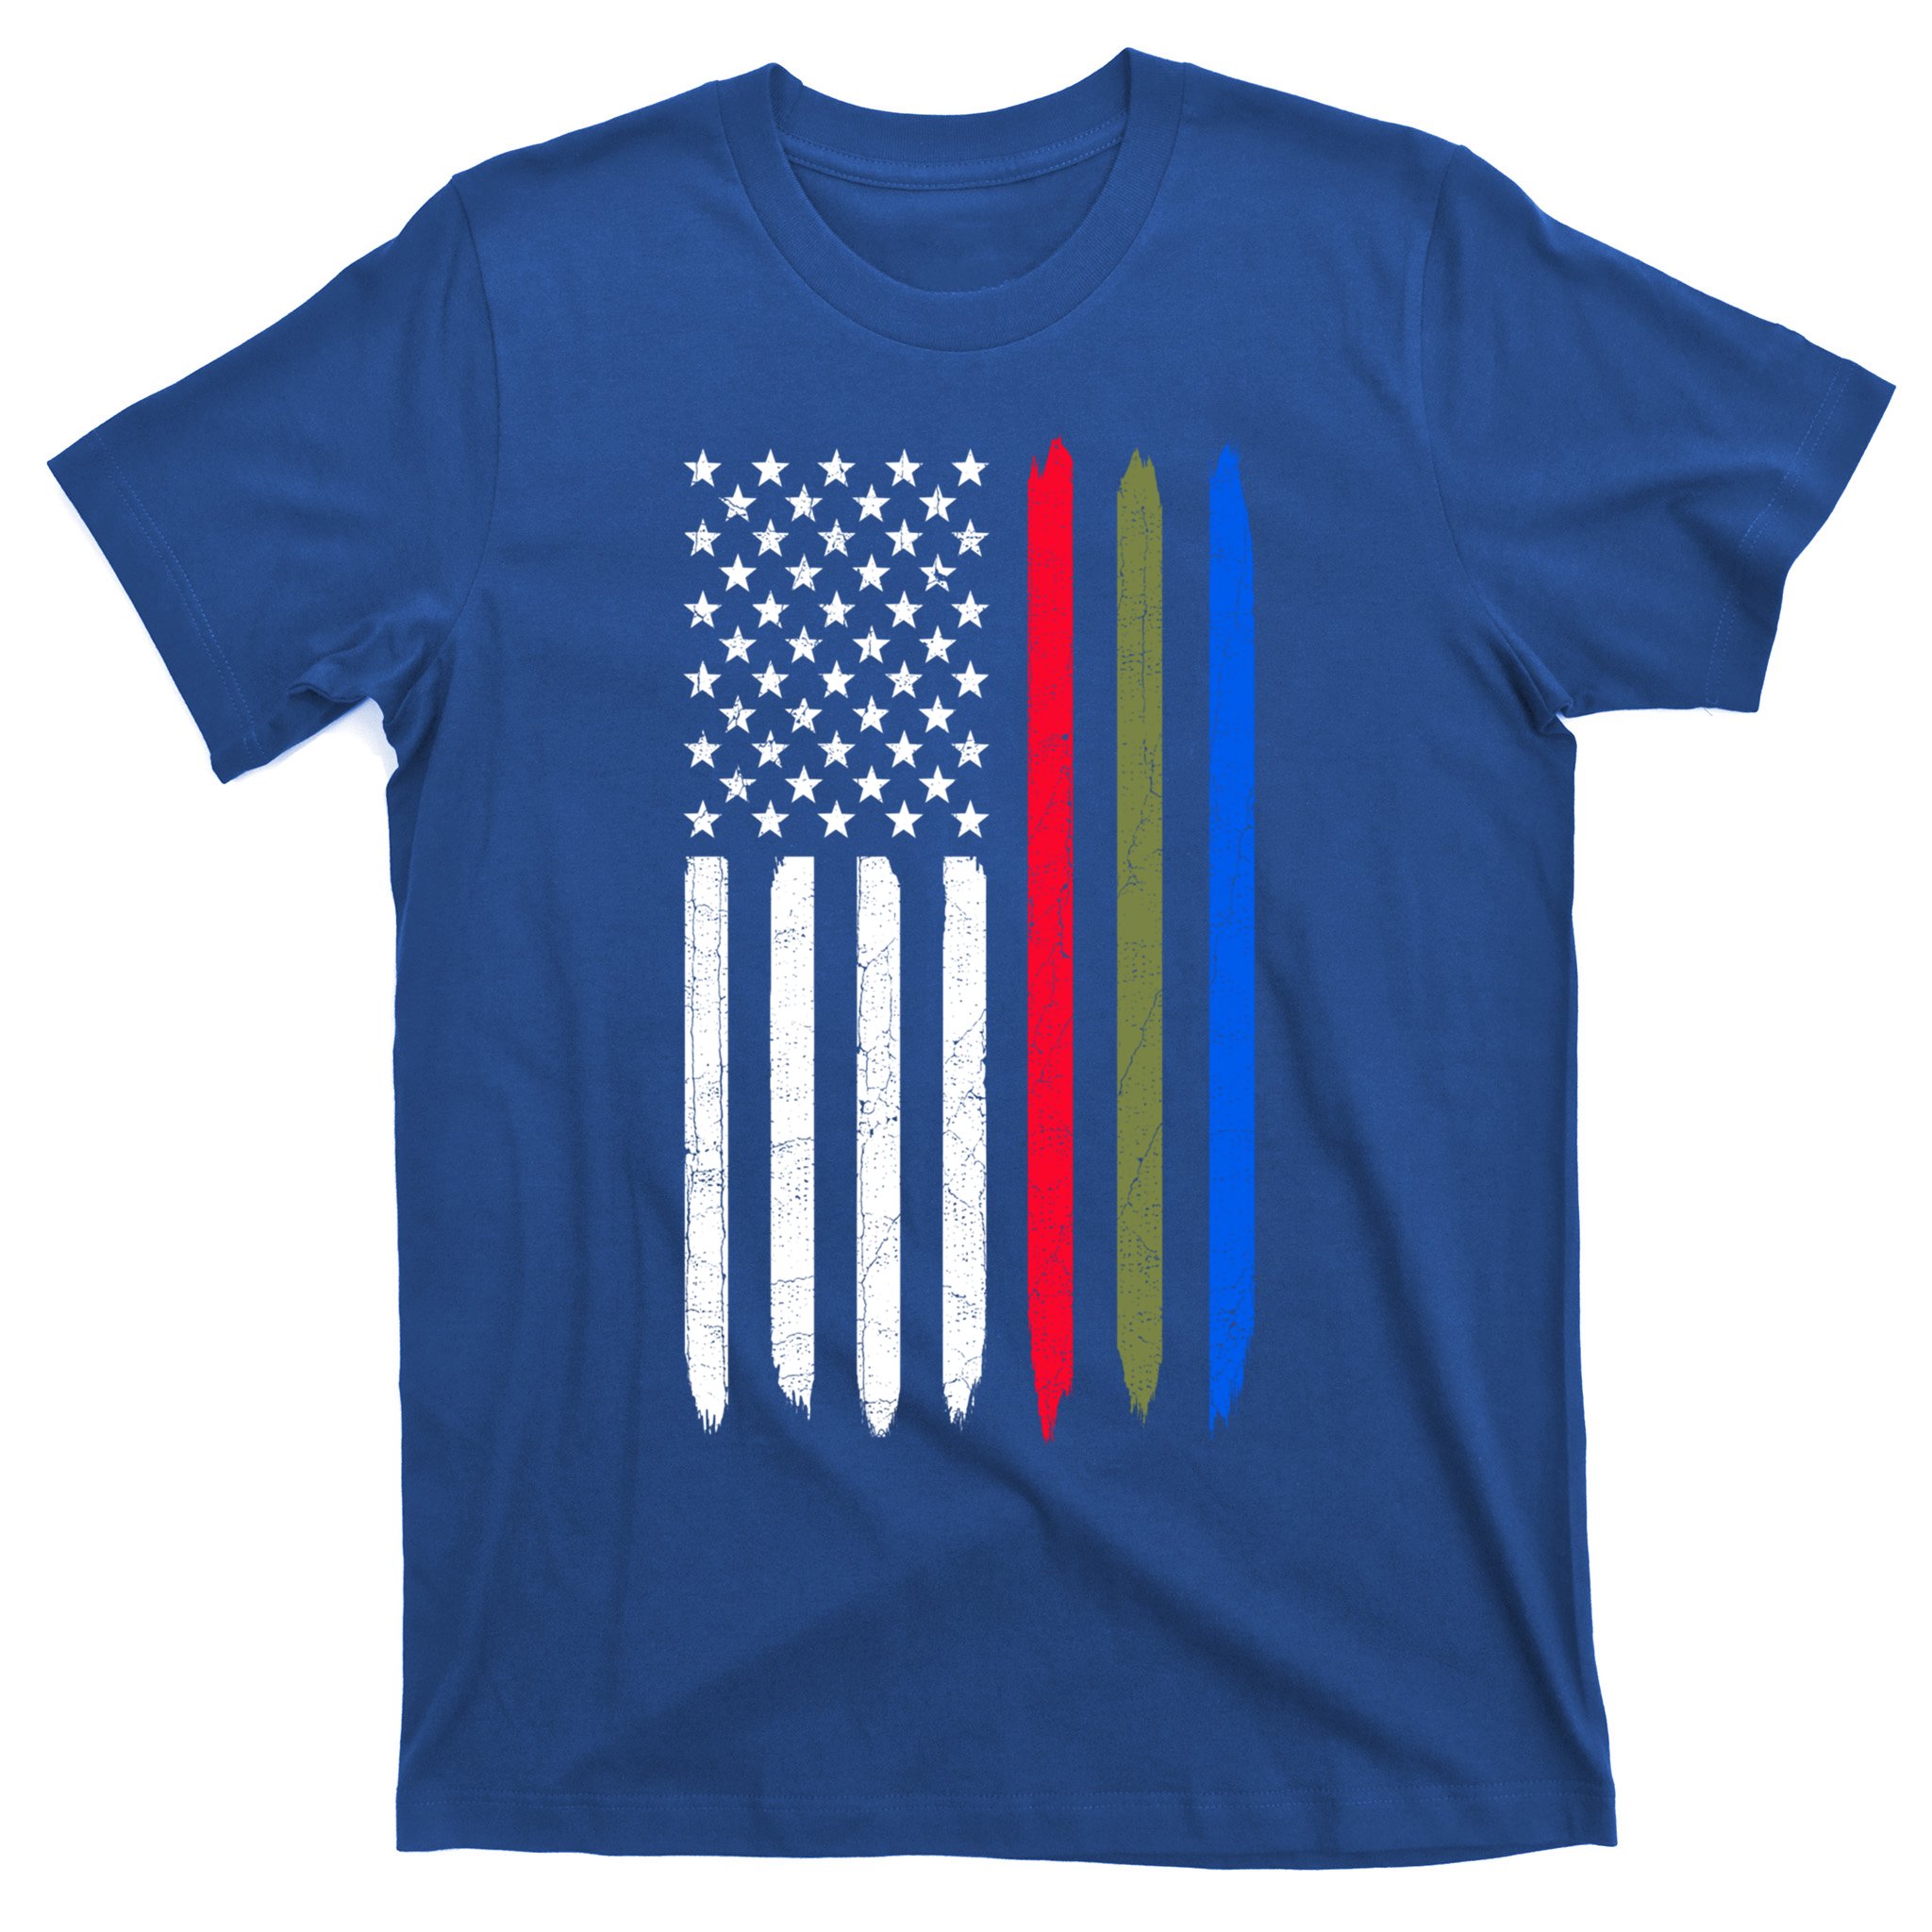  Police Military and Fire Thin Line American Flag